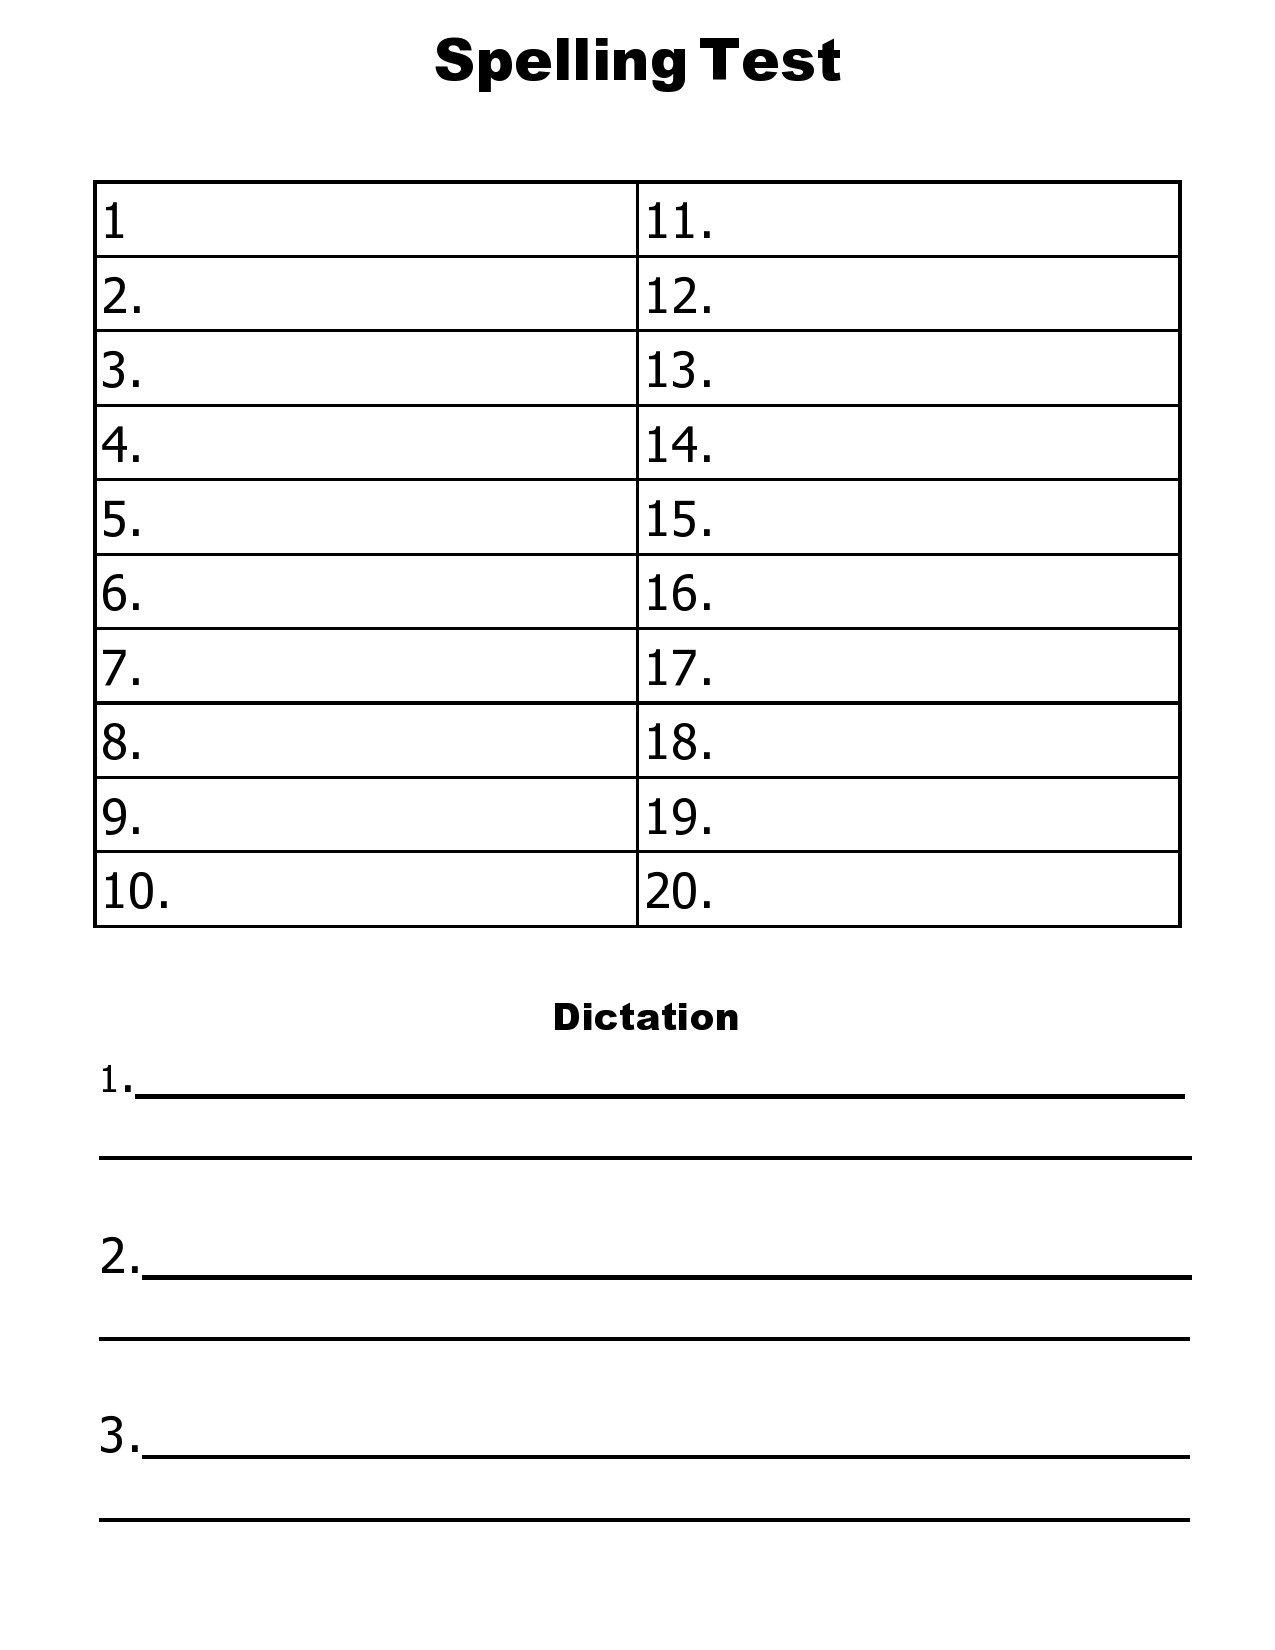 spelling-test-template-15-words-free-printable-fillable-form-2023